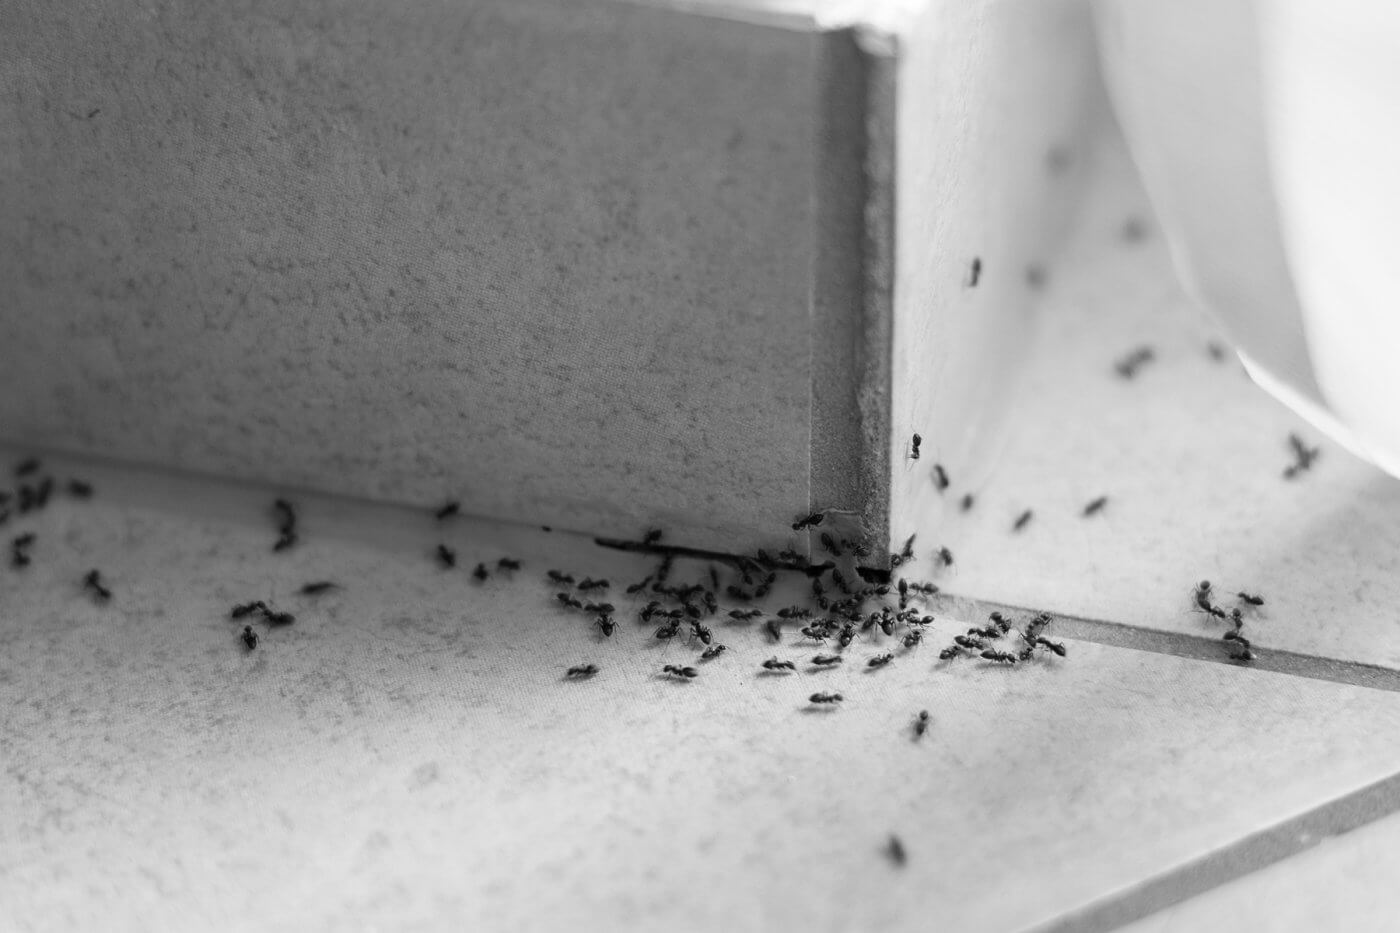 Pest Control for the New Year: Bug-Busting Resolutions